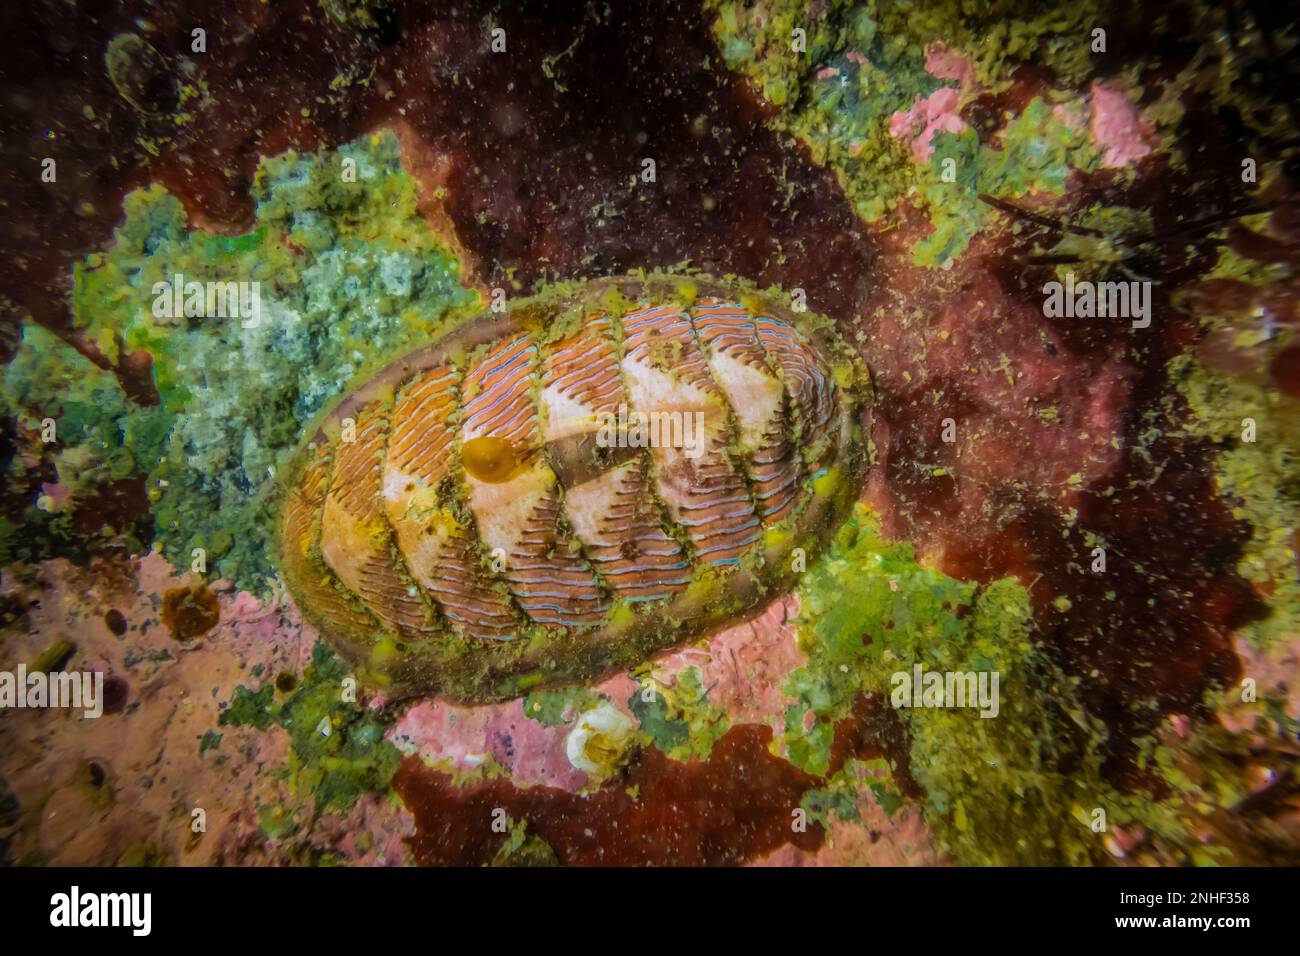 Lined Chiton, Tonicella lineata, at Point of Arches in Olympic National Park, Washington State, USA Stock Photo